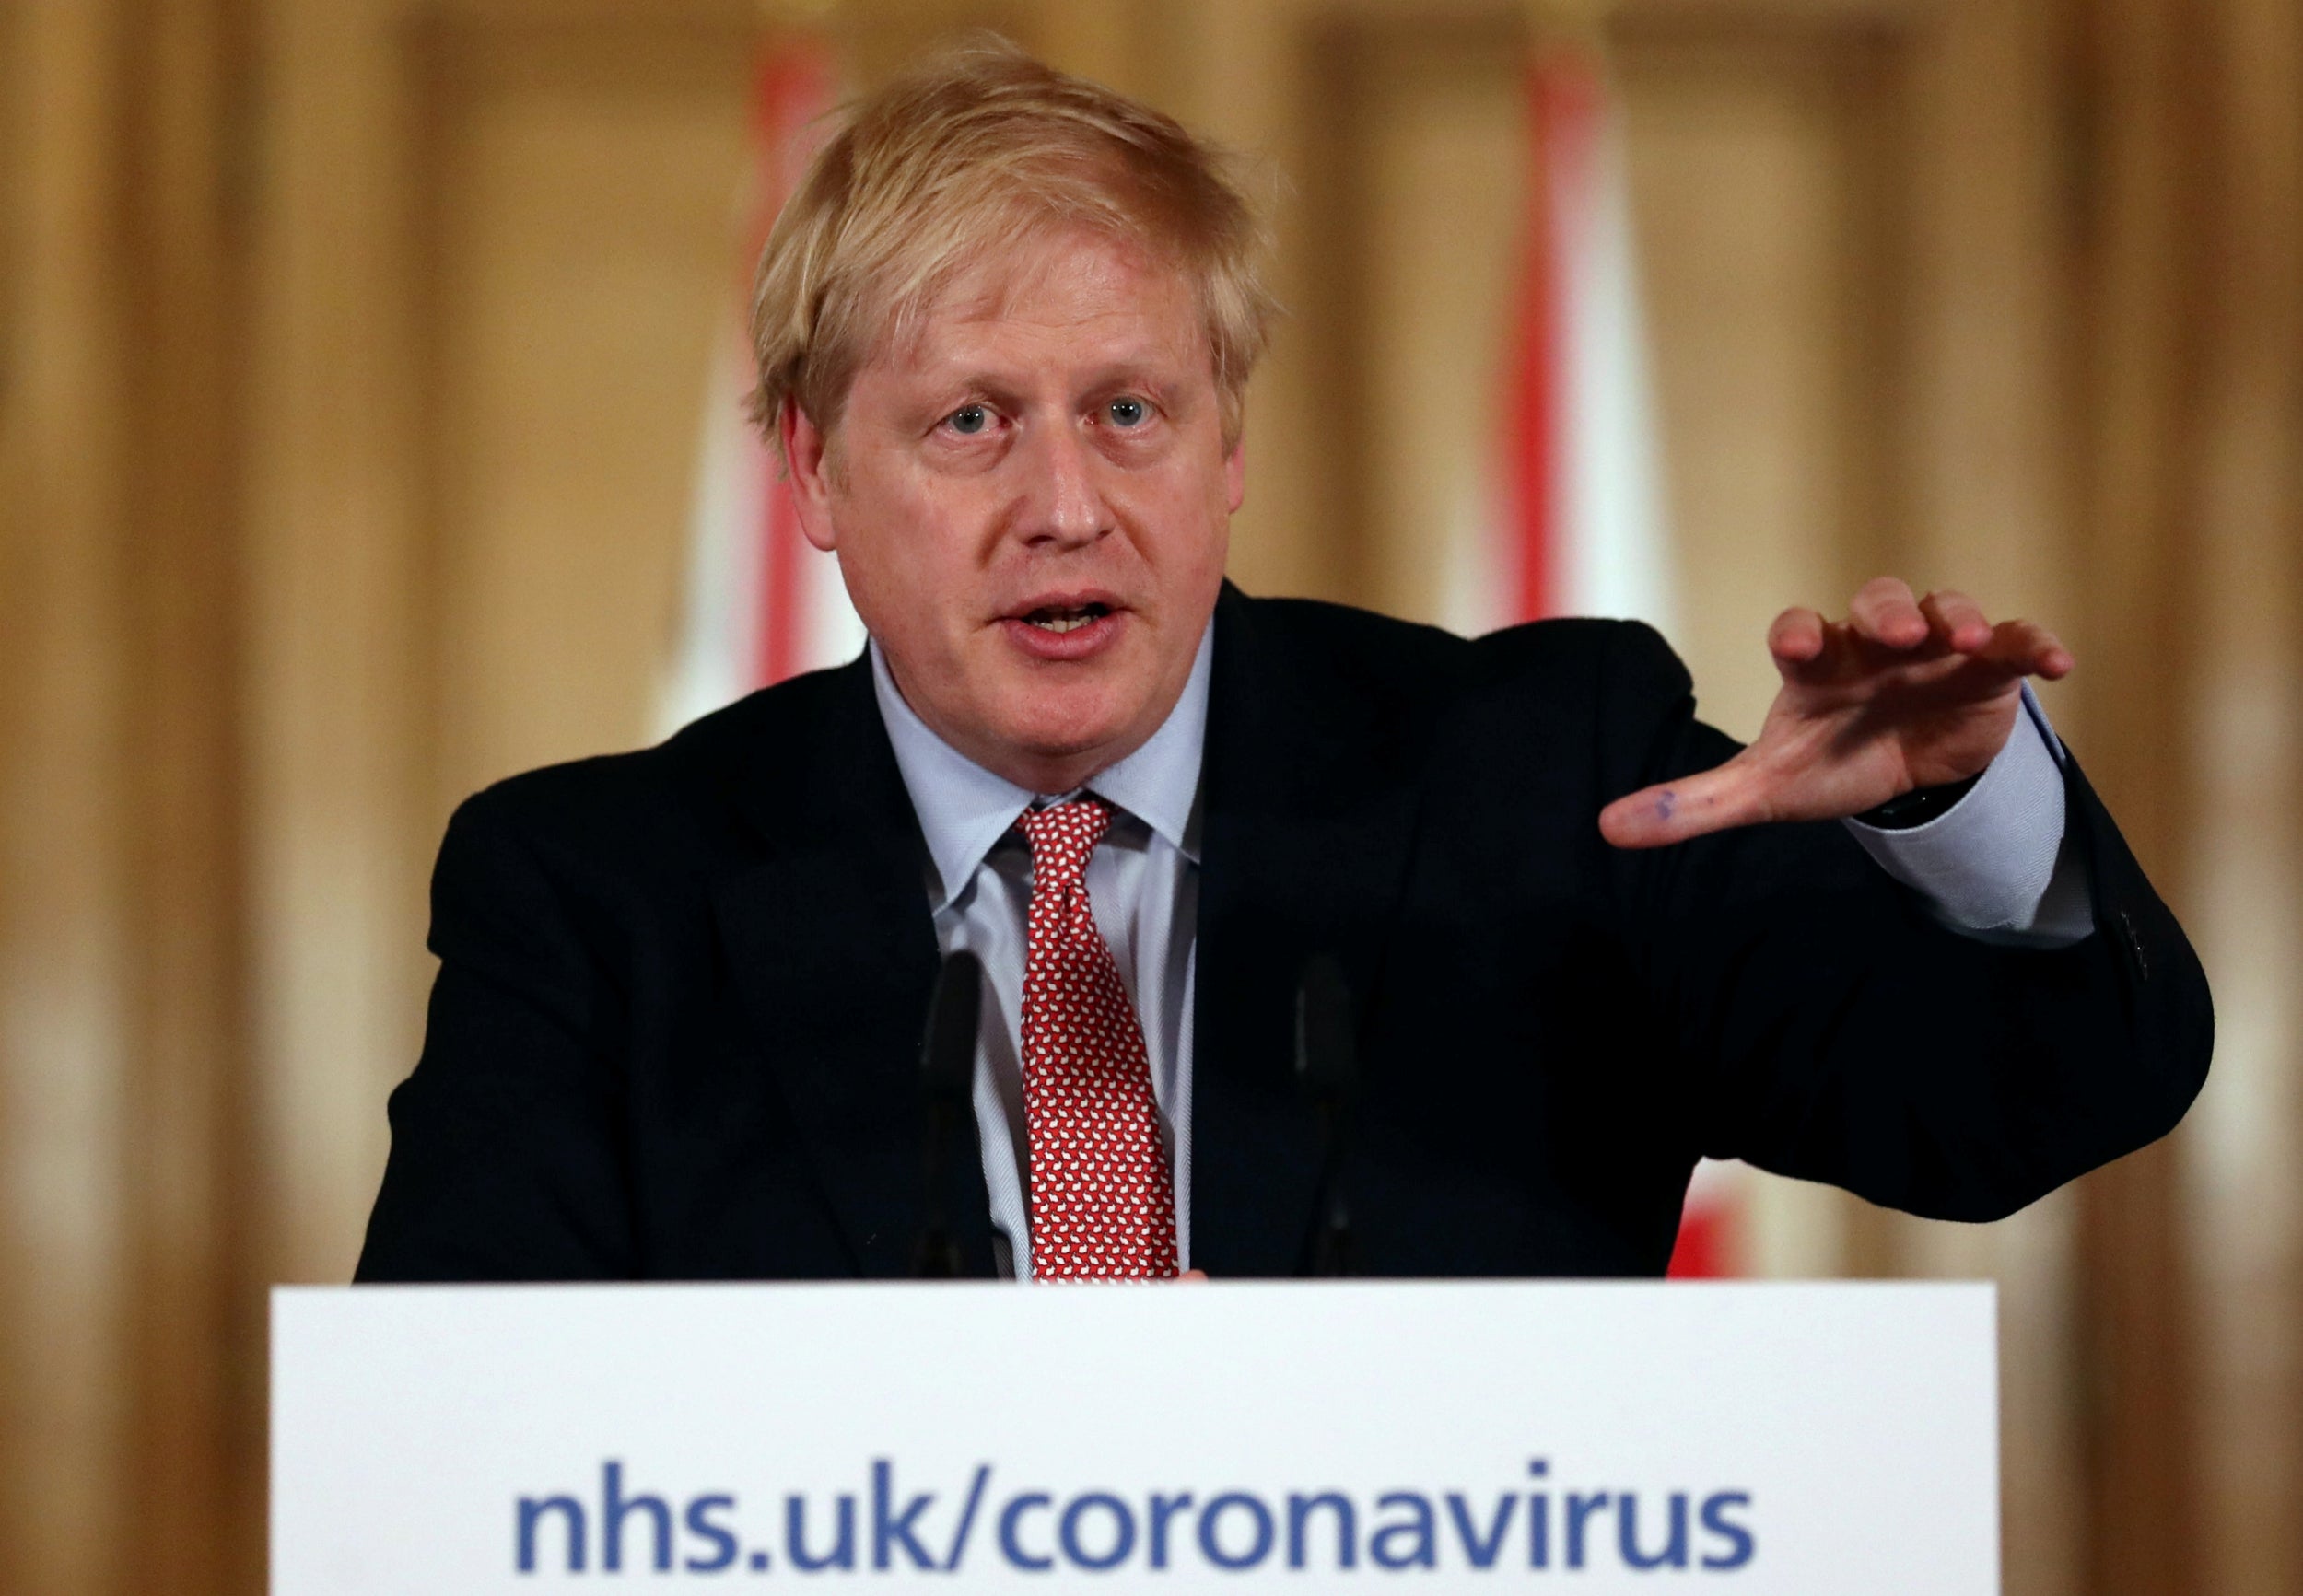 Johnson holds a press conference addressing the government’s response to the coronavirus outbreak